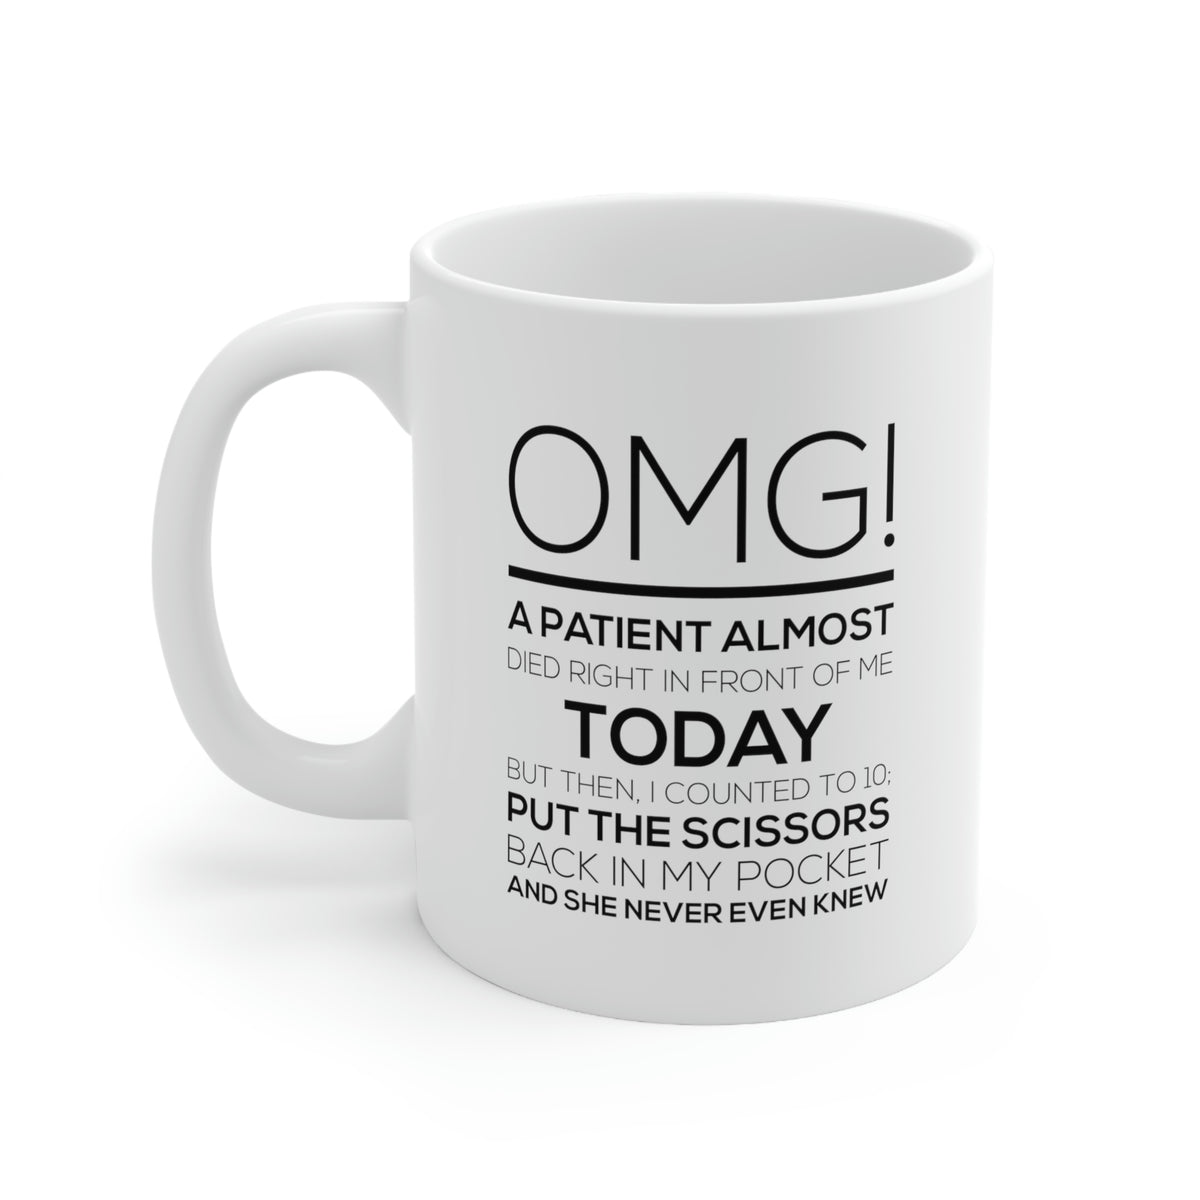 Funny Nurse Coffee Mug - OMG! A patient almost died Cup - Cheap Birthday Christmas For Practitioner Retired Nursing Mom